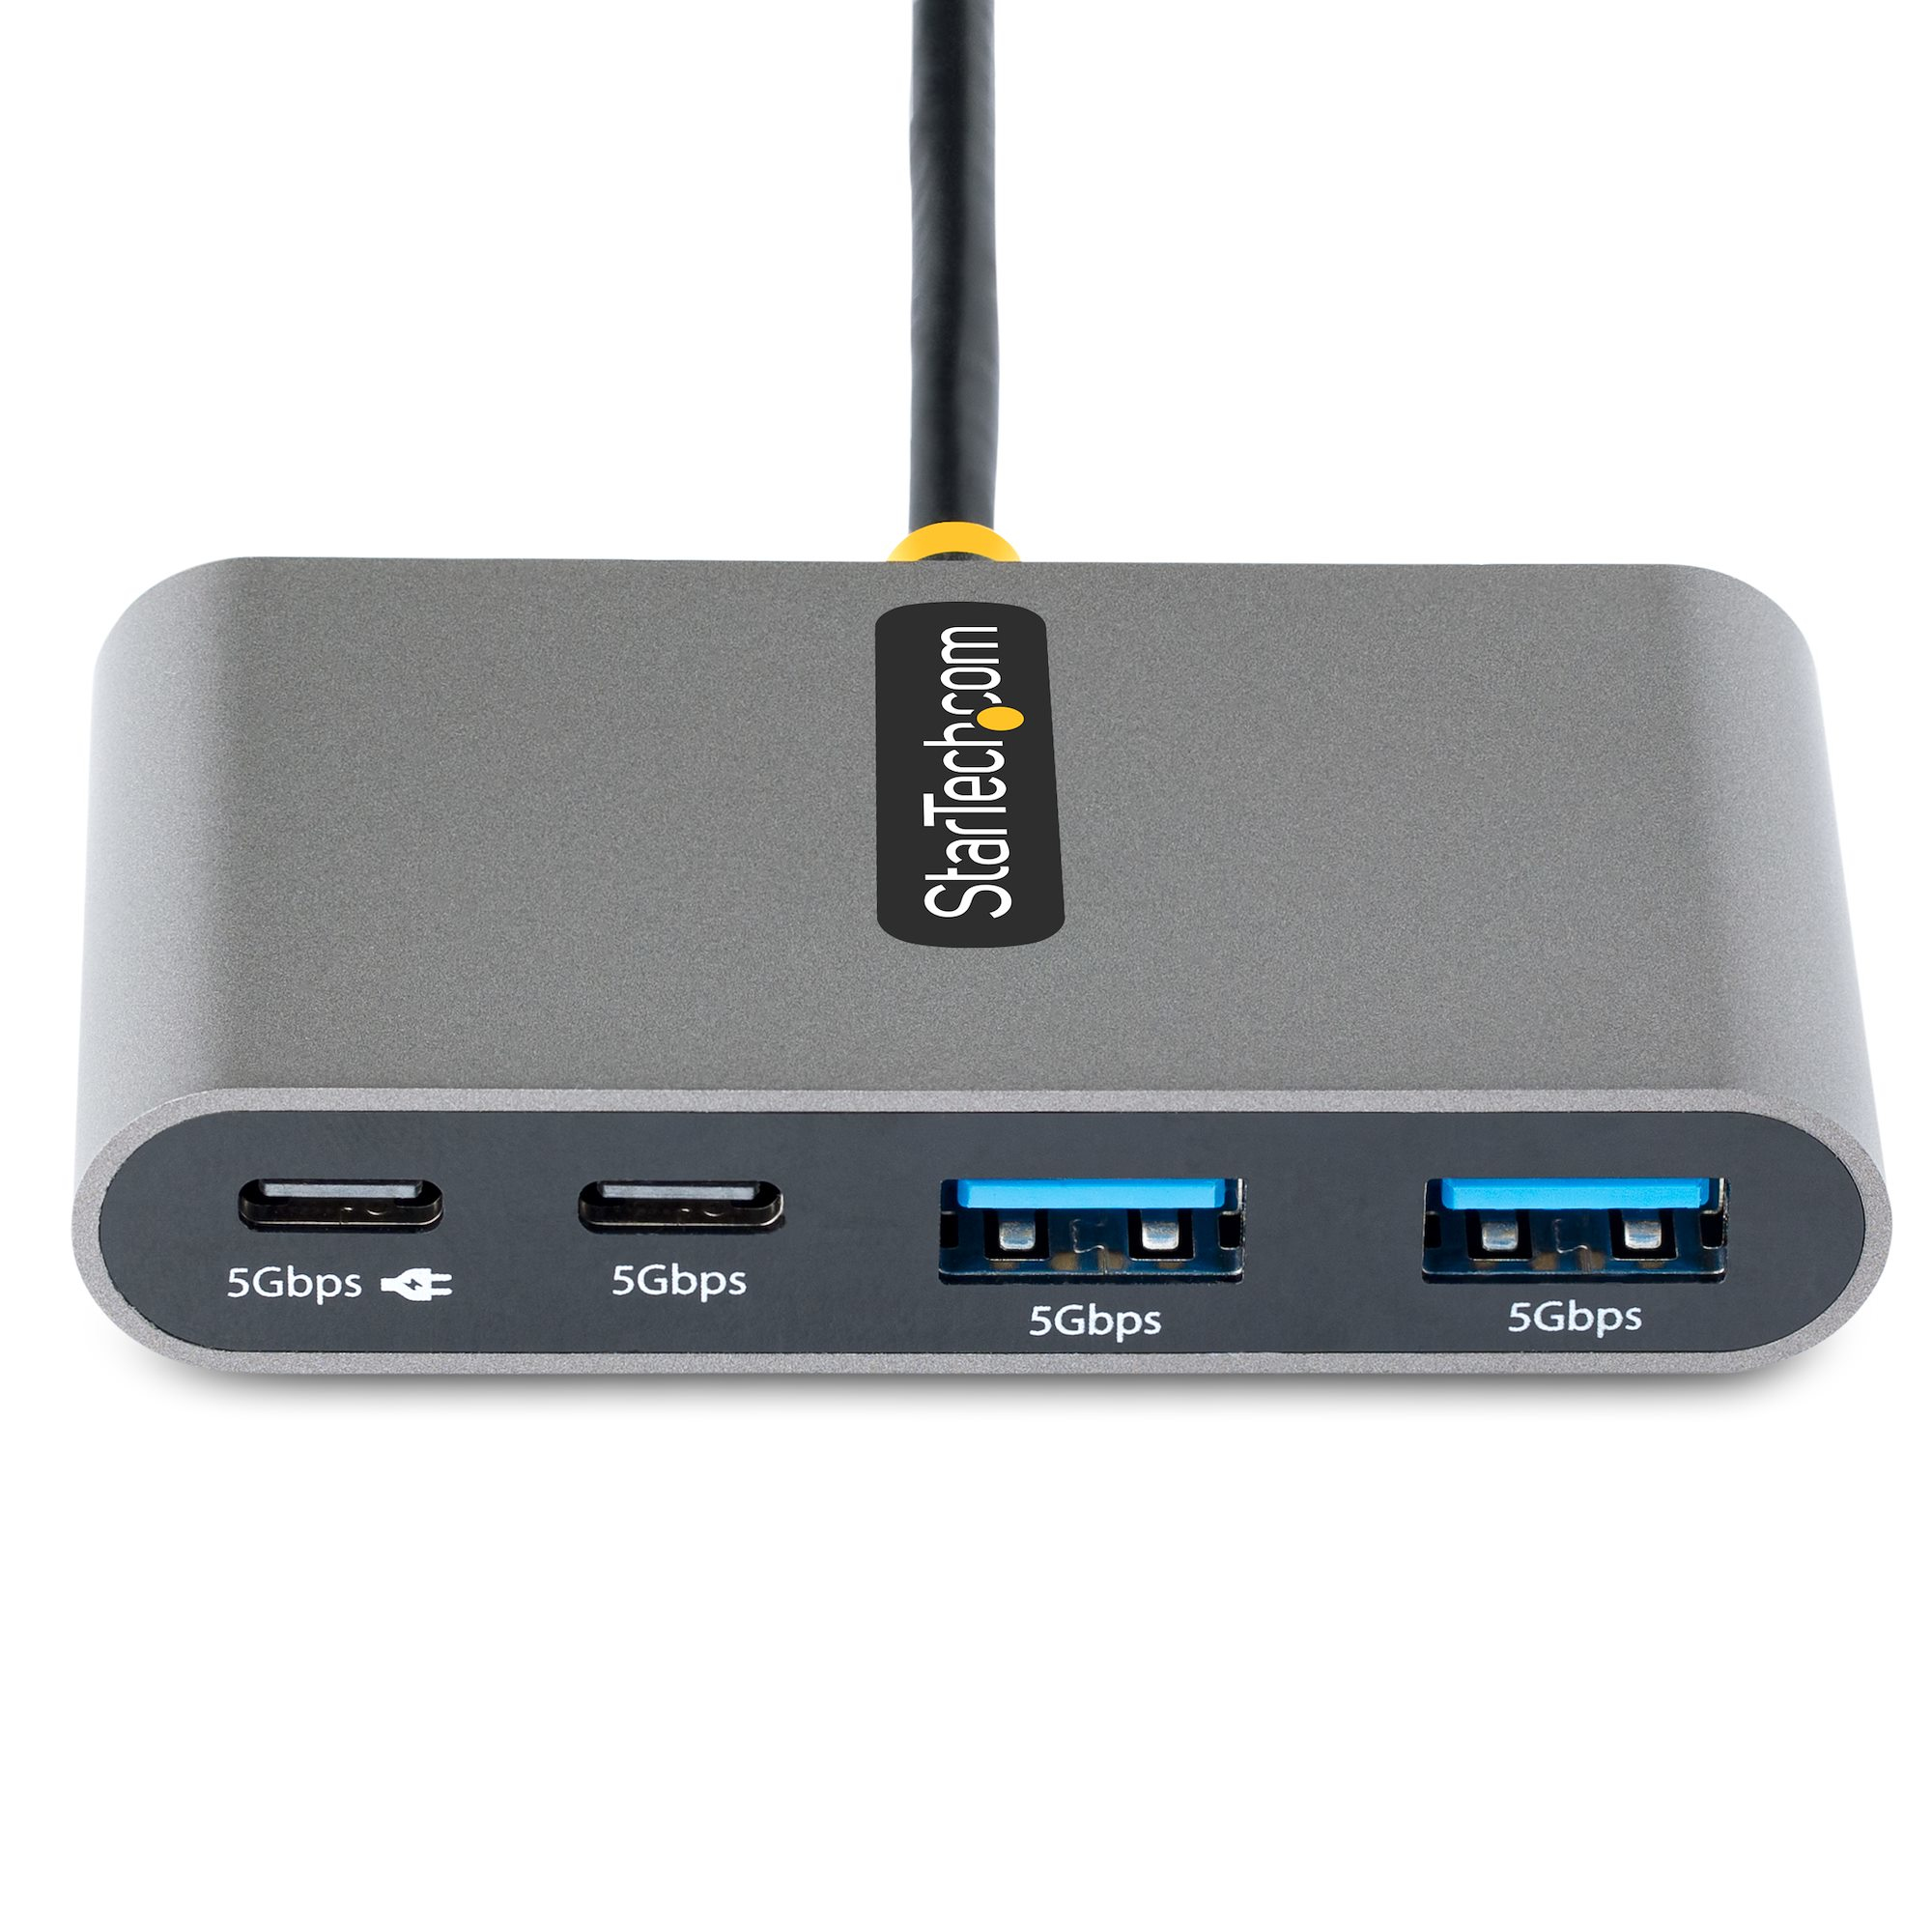 StarTech.com 4-Port USB-C Hub with 100W Power Delivery Pass-Through - 2x USB-A + 2x USB-C - USB 3.0 5Gbps - 1ft (30cm) Long Cable - Portable USB Type-C to USB-A/C Hub